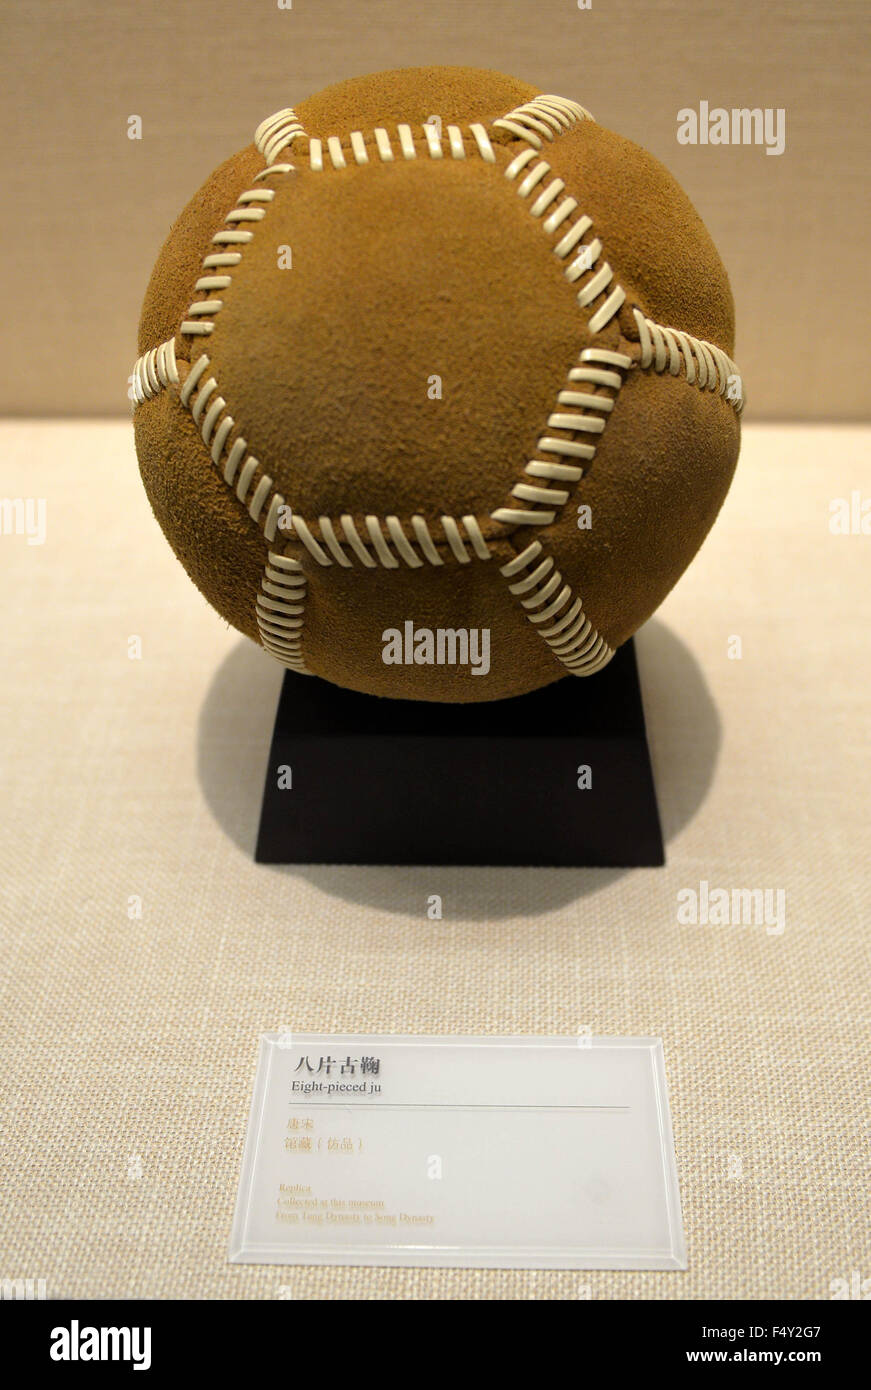 (151024) -- LINZI(SHANDONG), Oct. 24, 2015 (Xinhua) -- Photo taken on Oct. 23, 2015 shows the model of a ball named eight-pieced ju at Linzi Football Museum in east China's Shandong Province. China's Linzi Football Museum announced a partnership with the National Football Museum in Manchester, England on Friday. The two museums would work together to promote their shared objectives of communicating football culture to a world-wide audience. Linzi district, the birth place of Cuju, has been officially recognized by FIFA in 2004 as the origin of football. (Xinhua/Zhu Zheng) Stock Photo